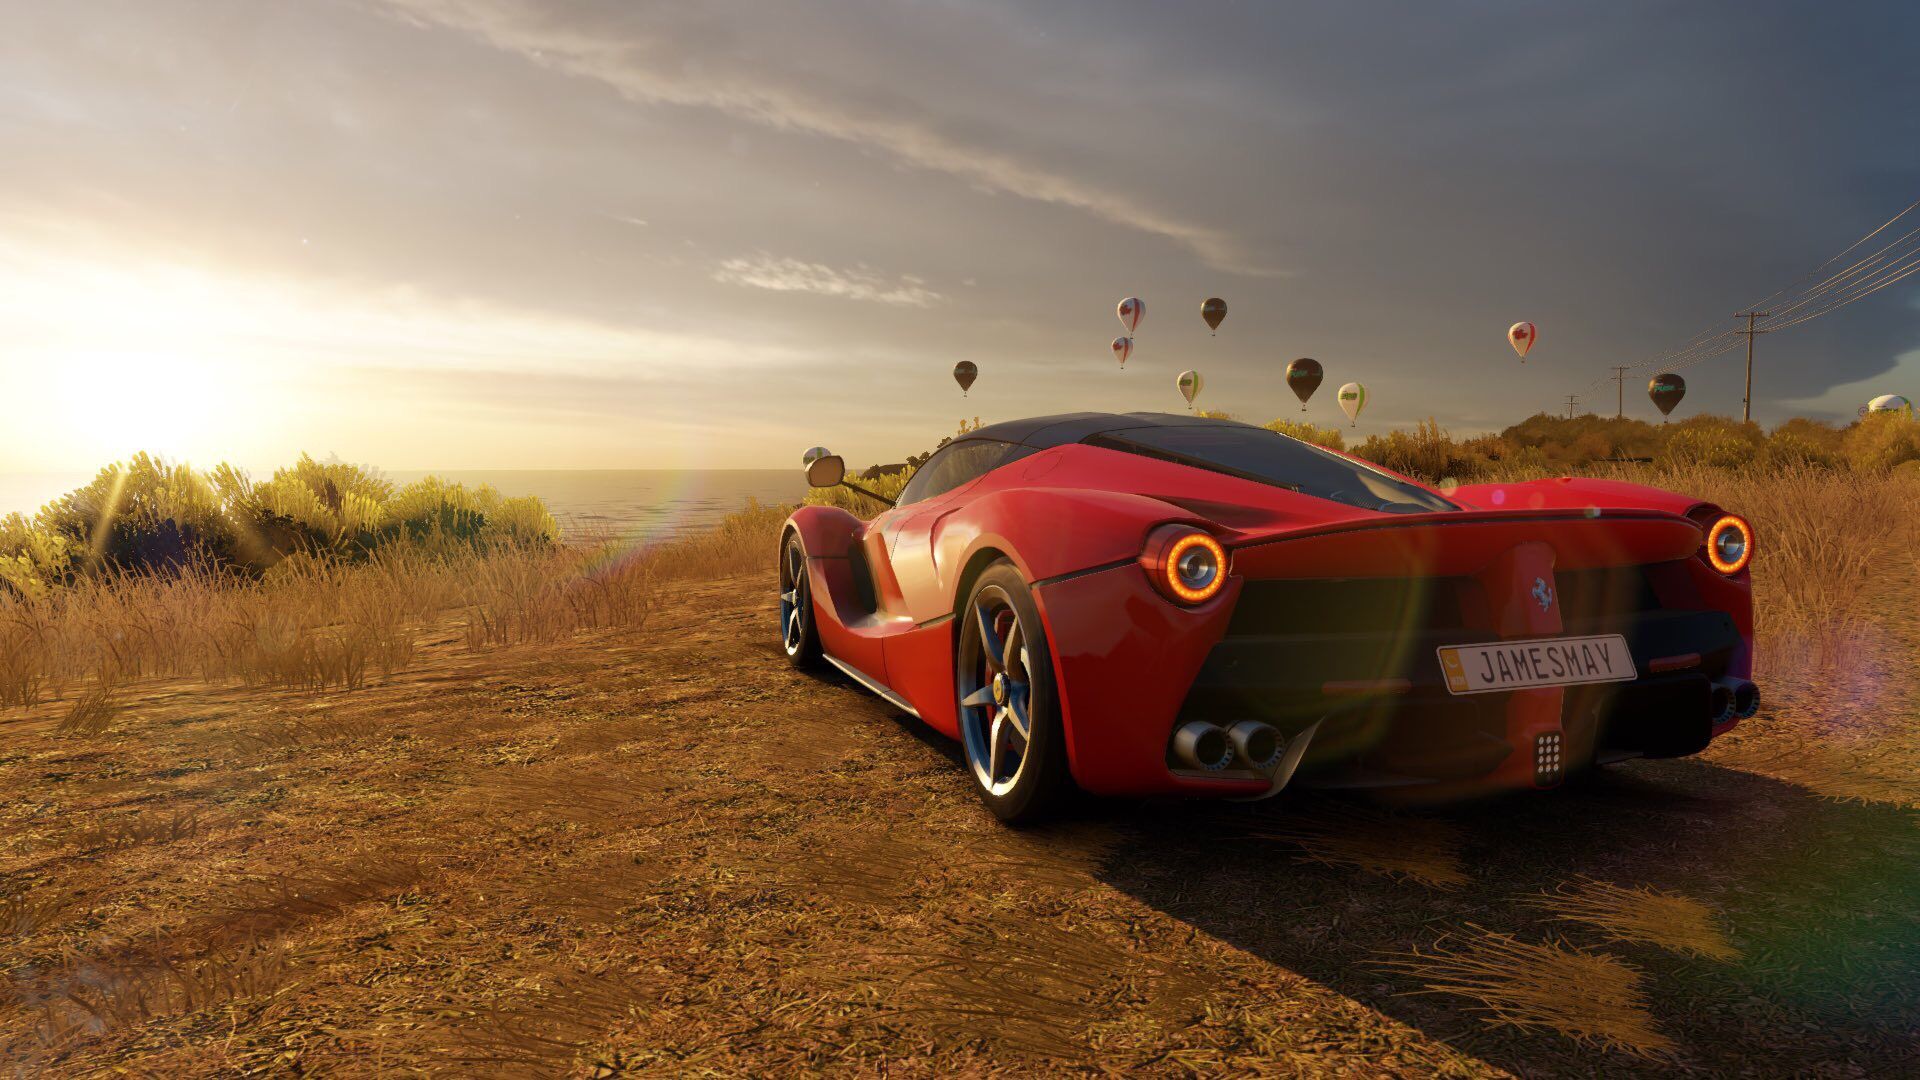 Forza Horizon 3 Review: As Big as It Gets for Arcade Racing Games